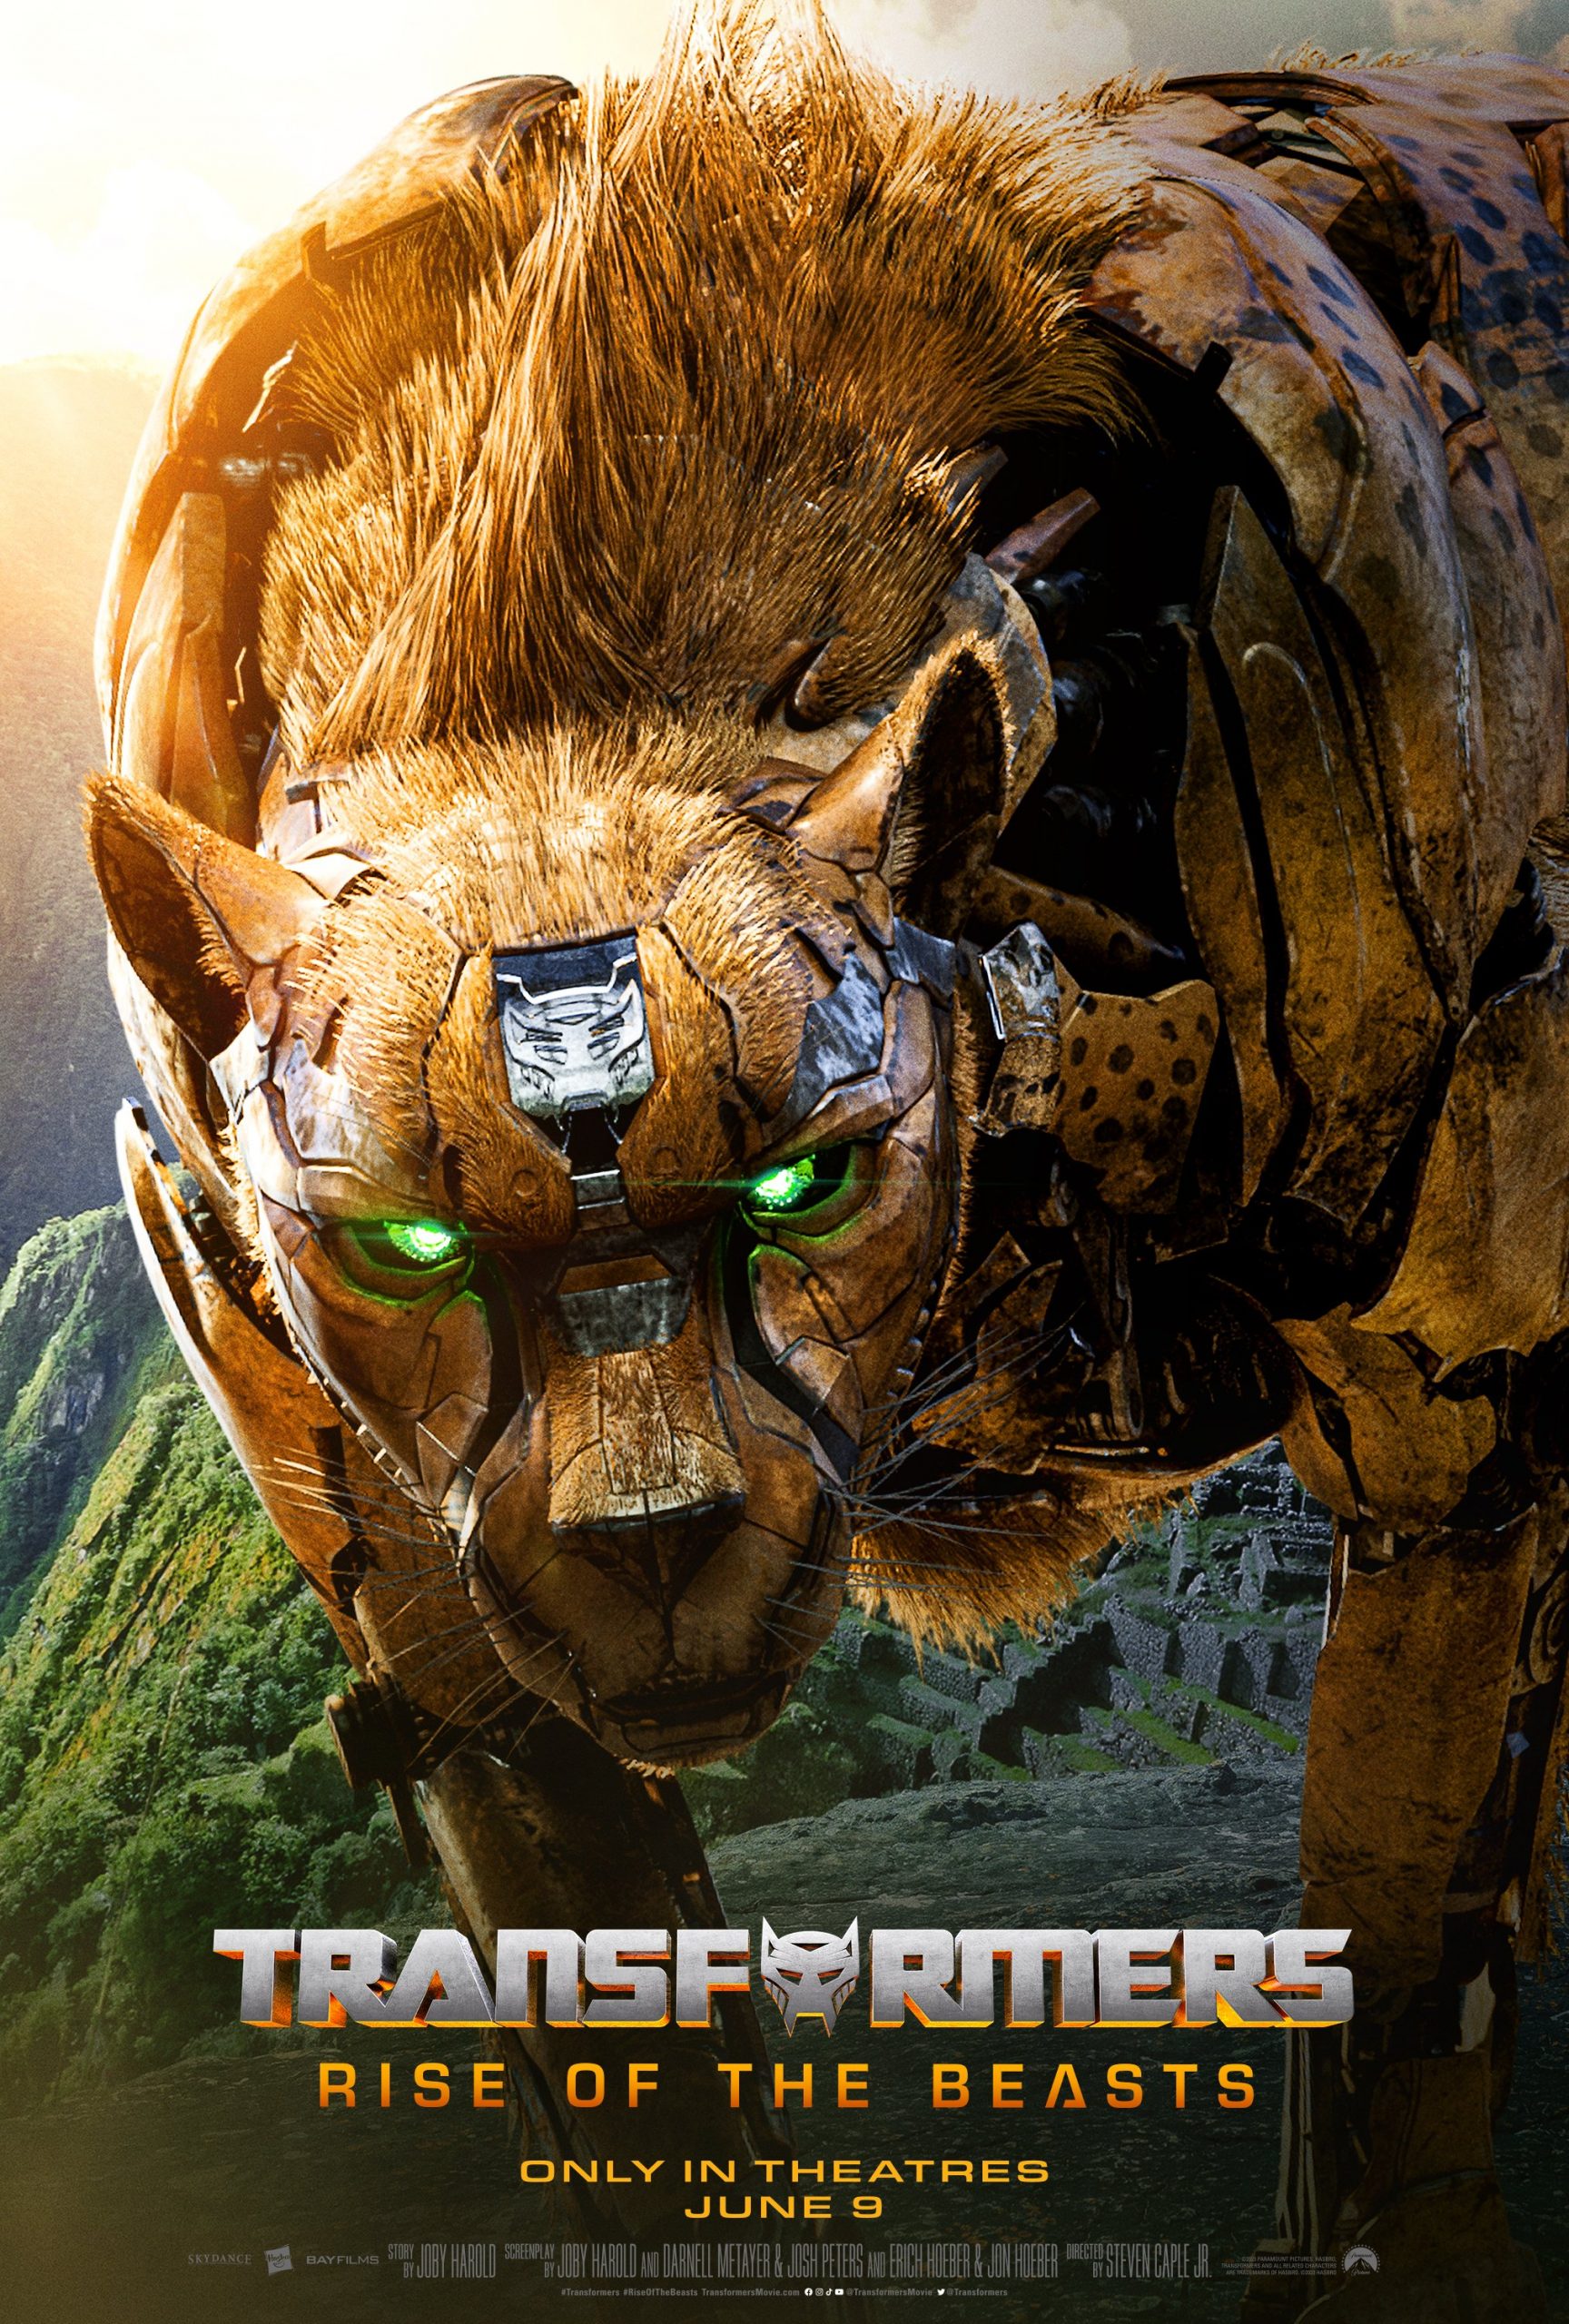 New “Tranformers: Rise of the Beasts” character posters and more appearances in the movie teased